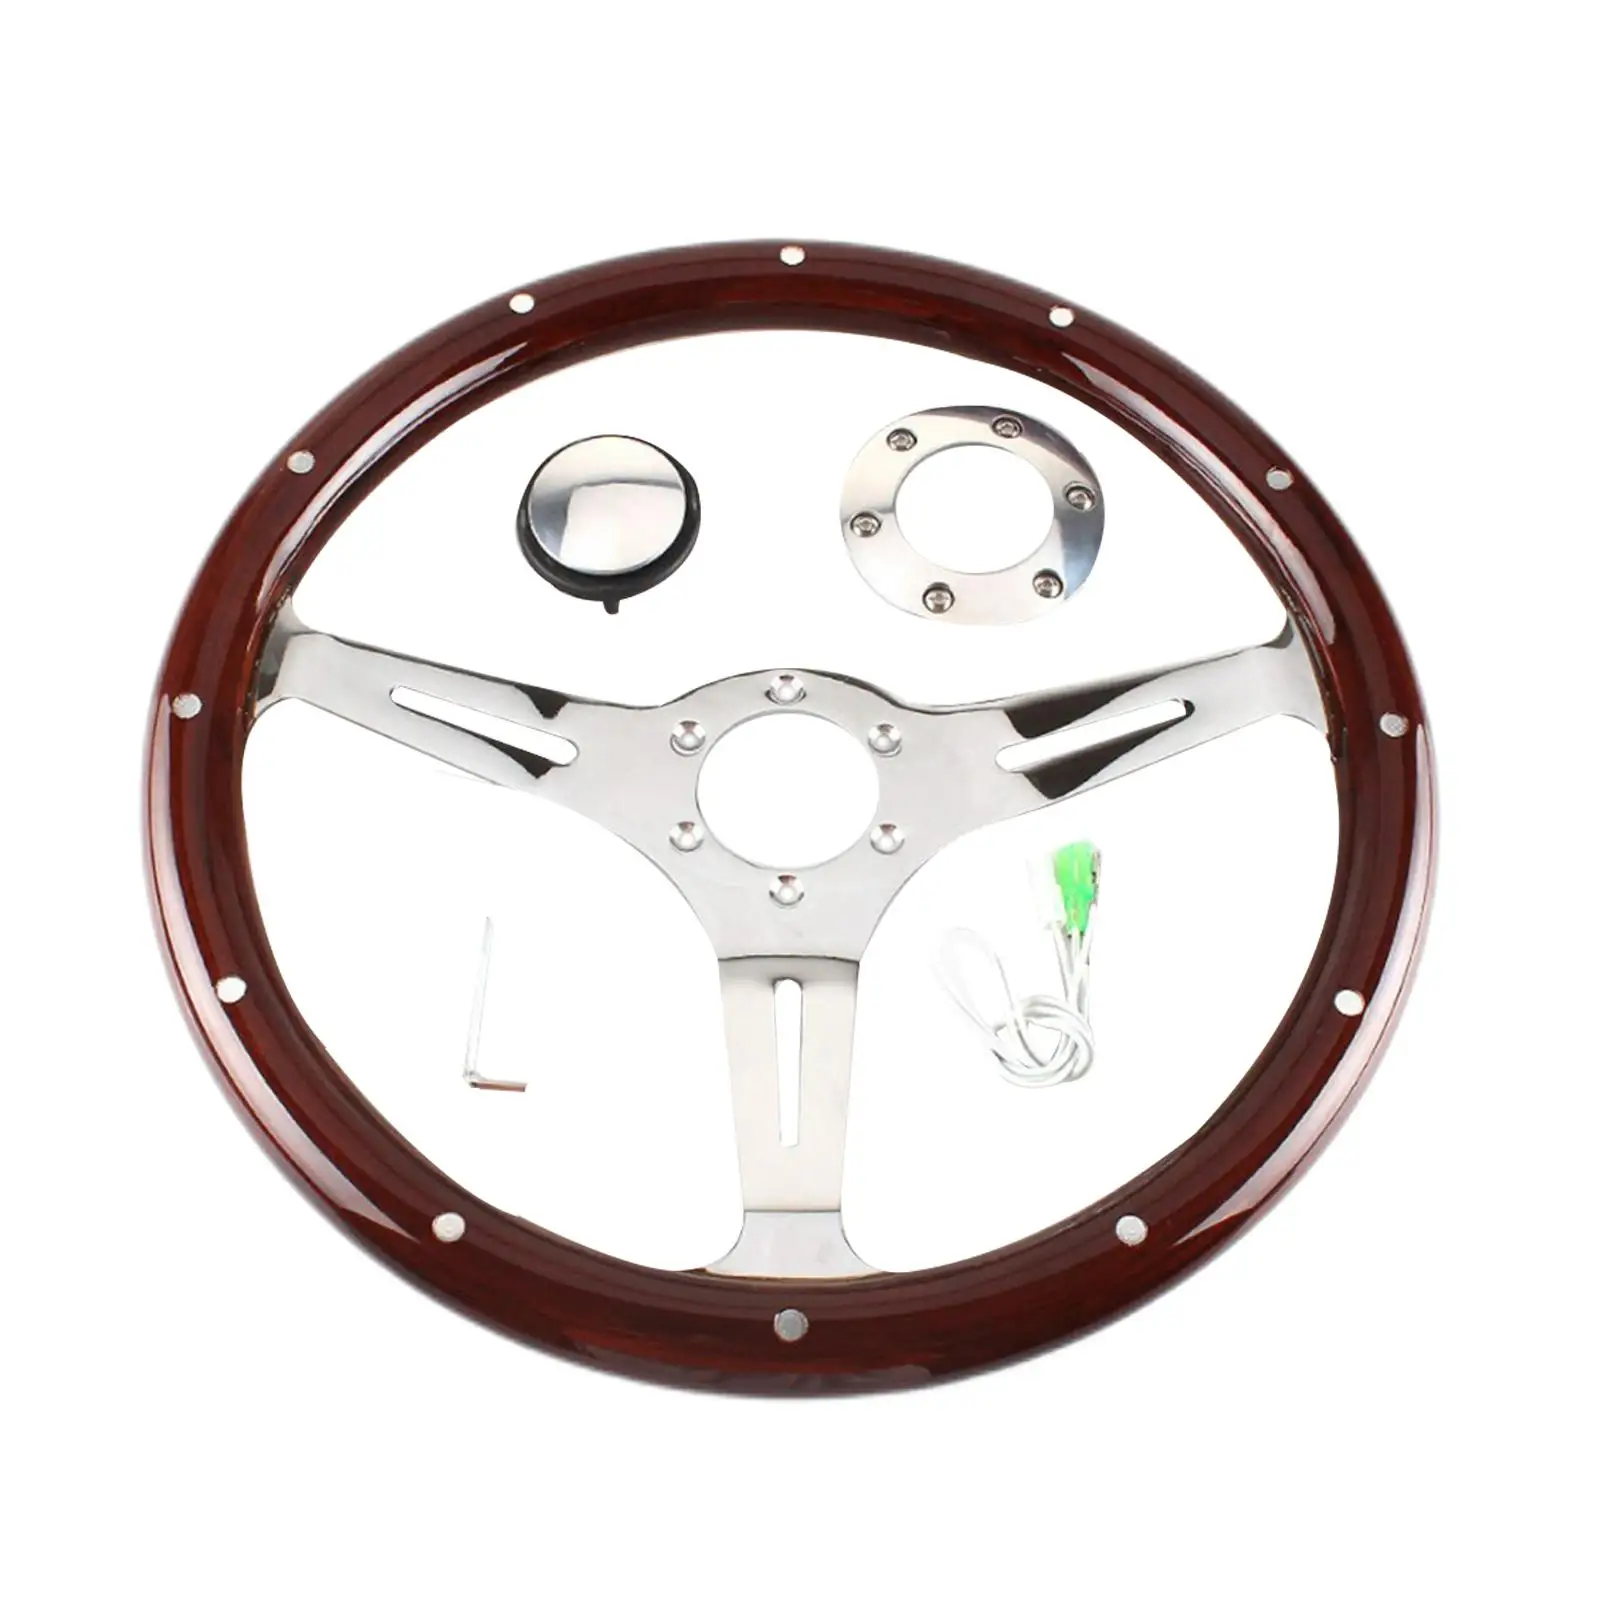 

380mm 15 Inch Classic Nostalgia Style Wooden Grain Steering Wheel 3 Spoke 6 Hole with Horn Kit for Classic Cars